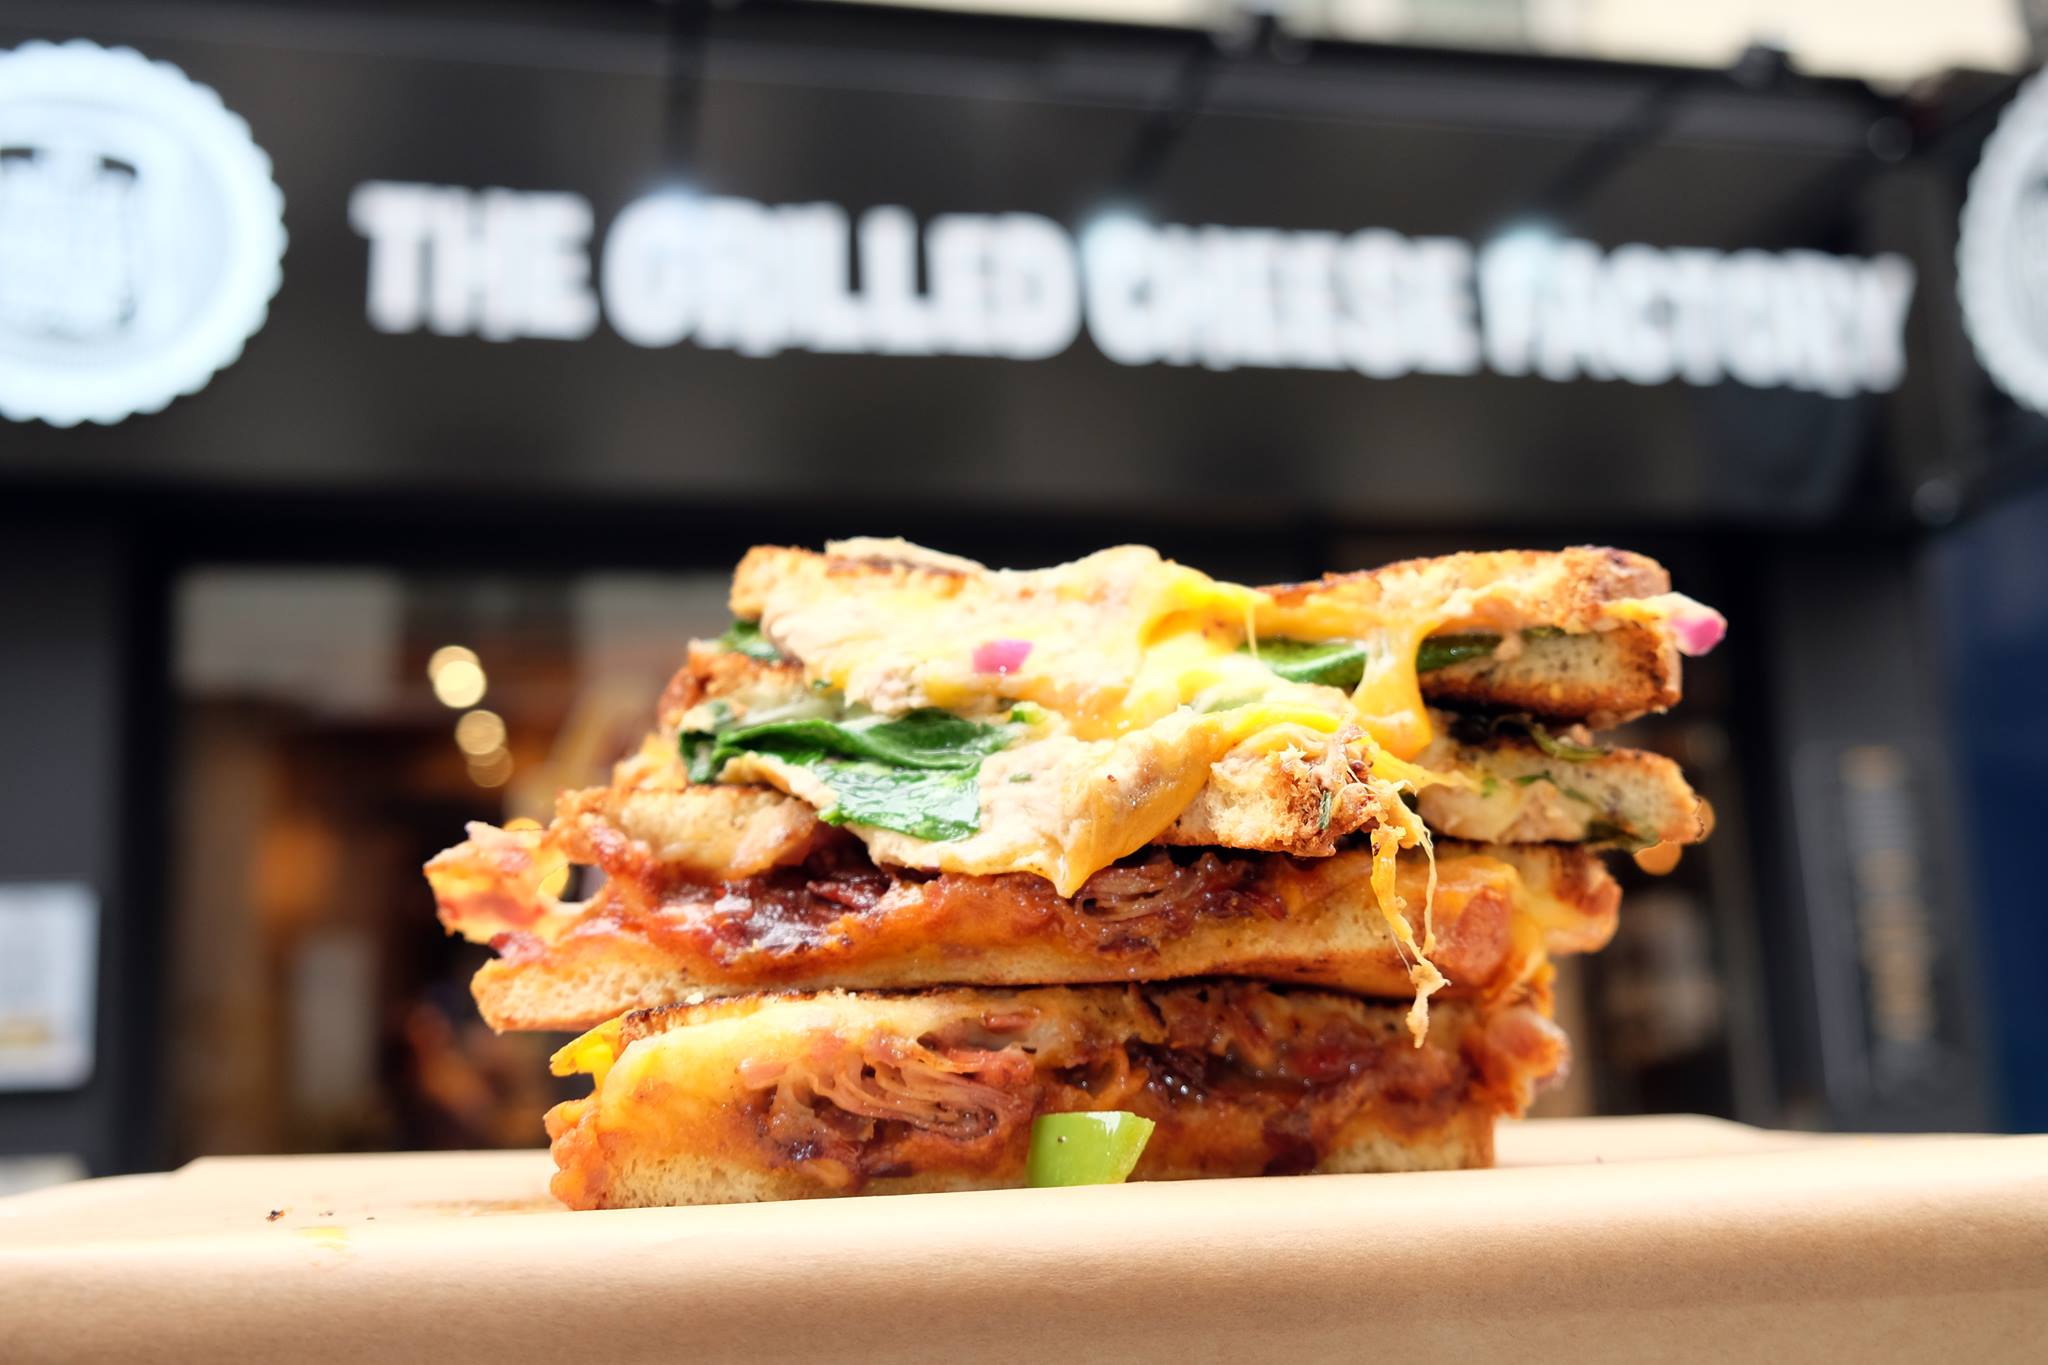 Marketing strategy to increase the number of visitors to the Grilled Cheese Factory restaurant chain (FR)